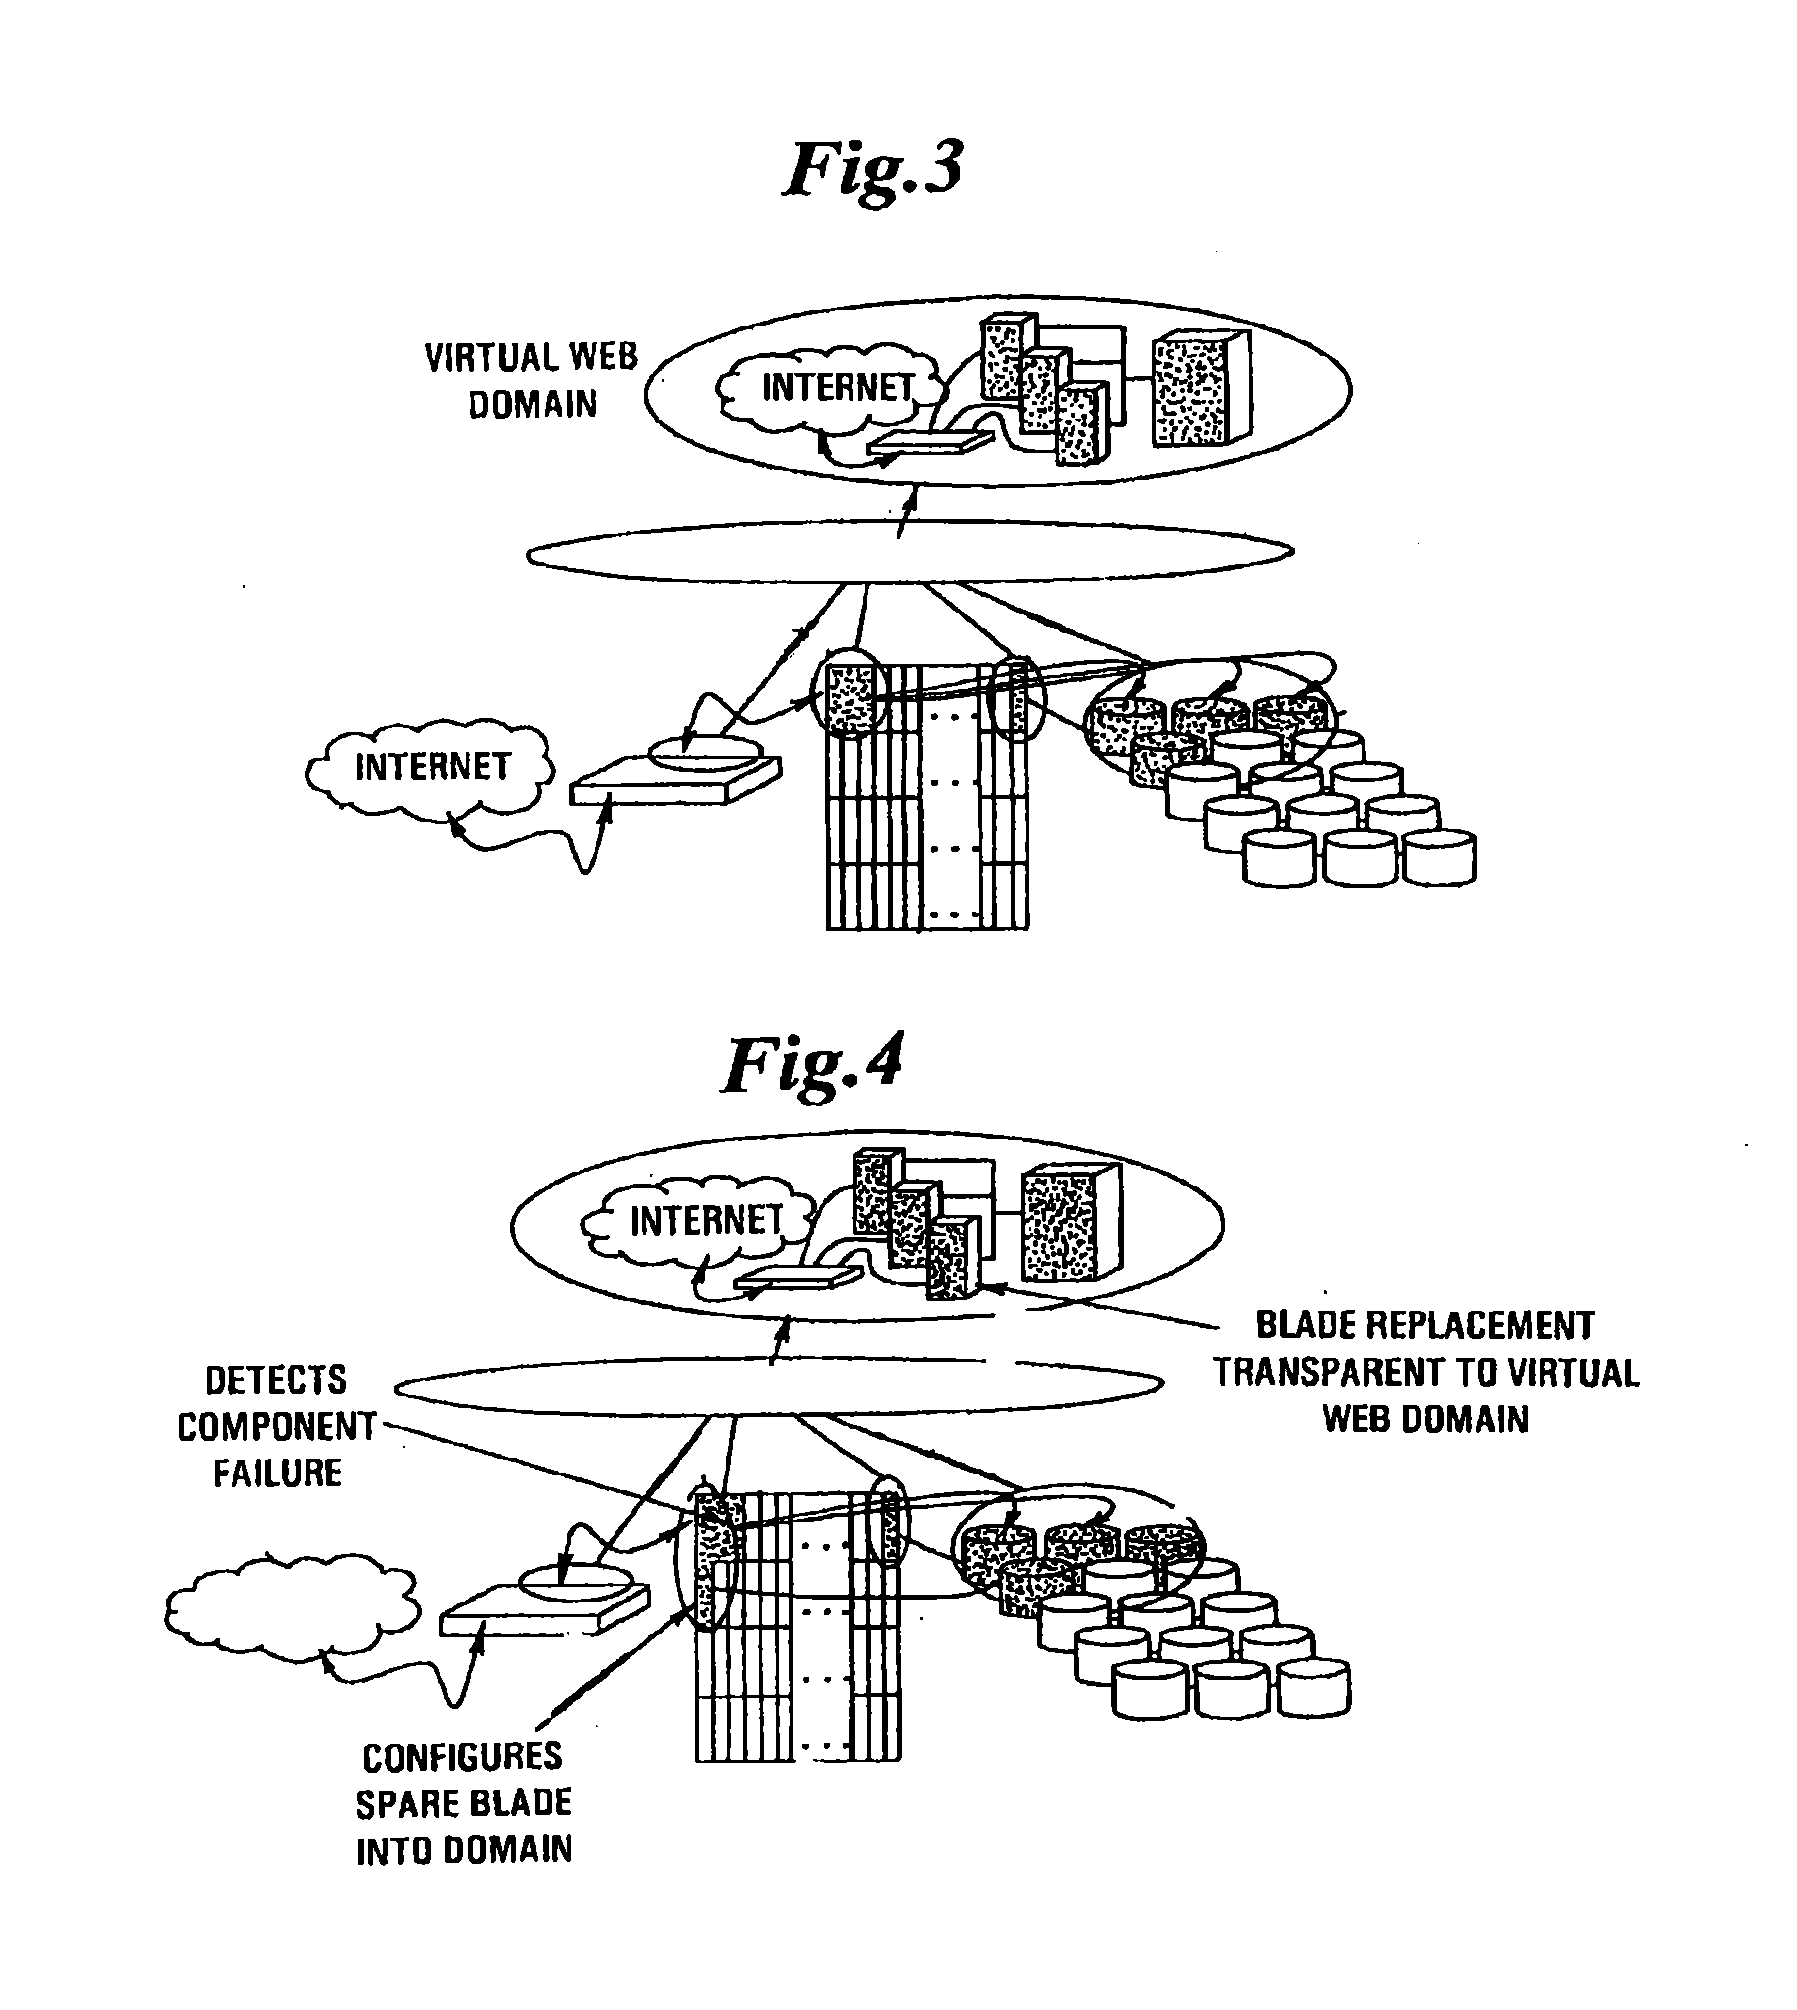 Method and System for Operating a Commissioned E-Commerce Service Prover